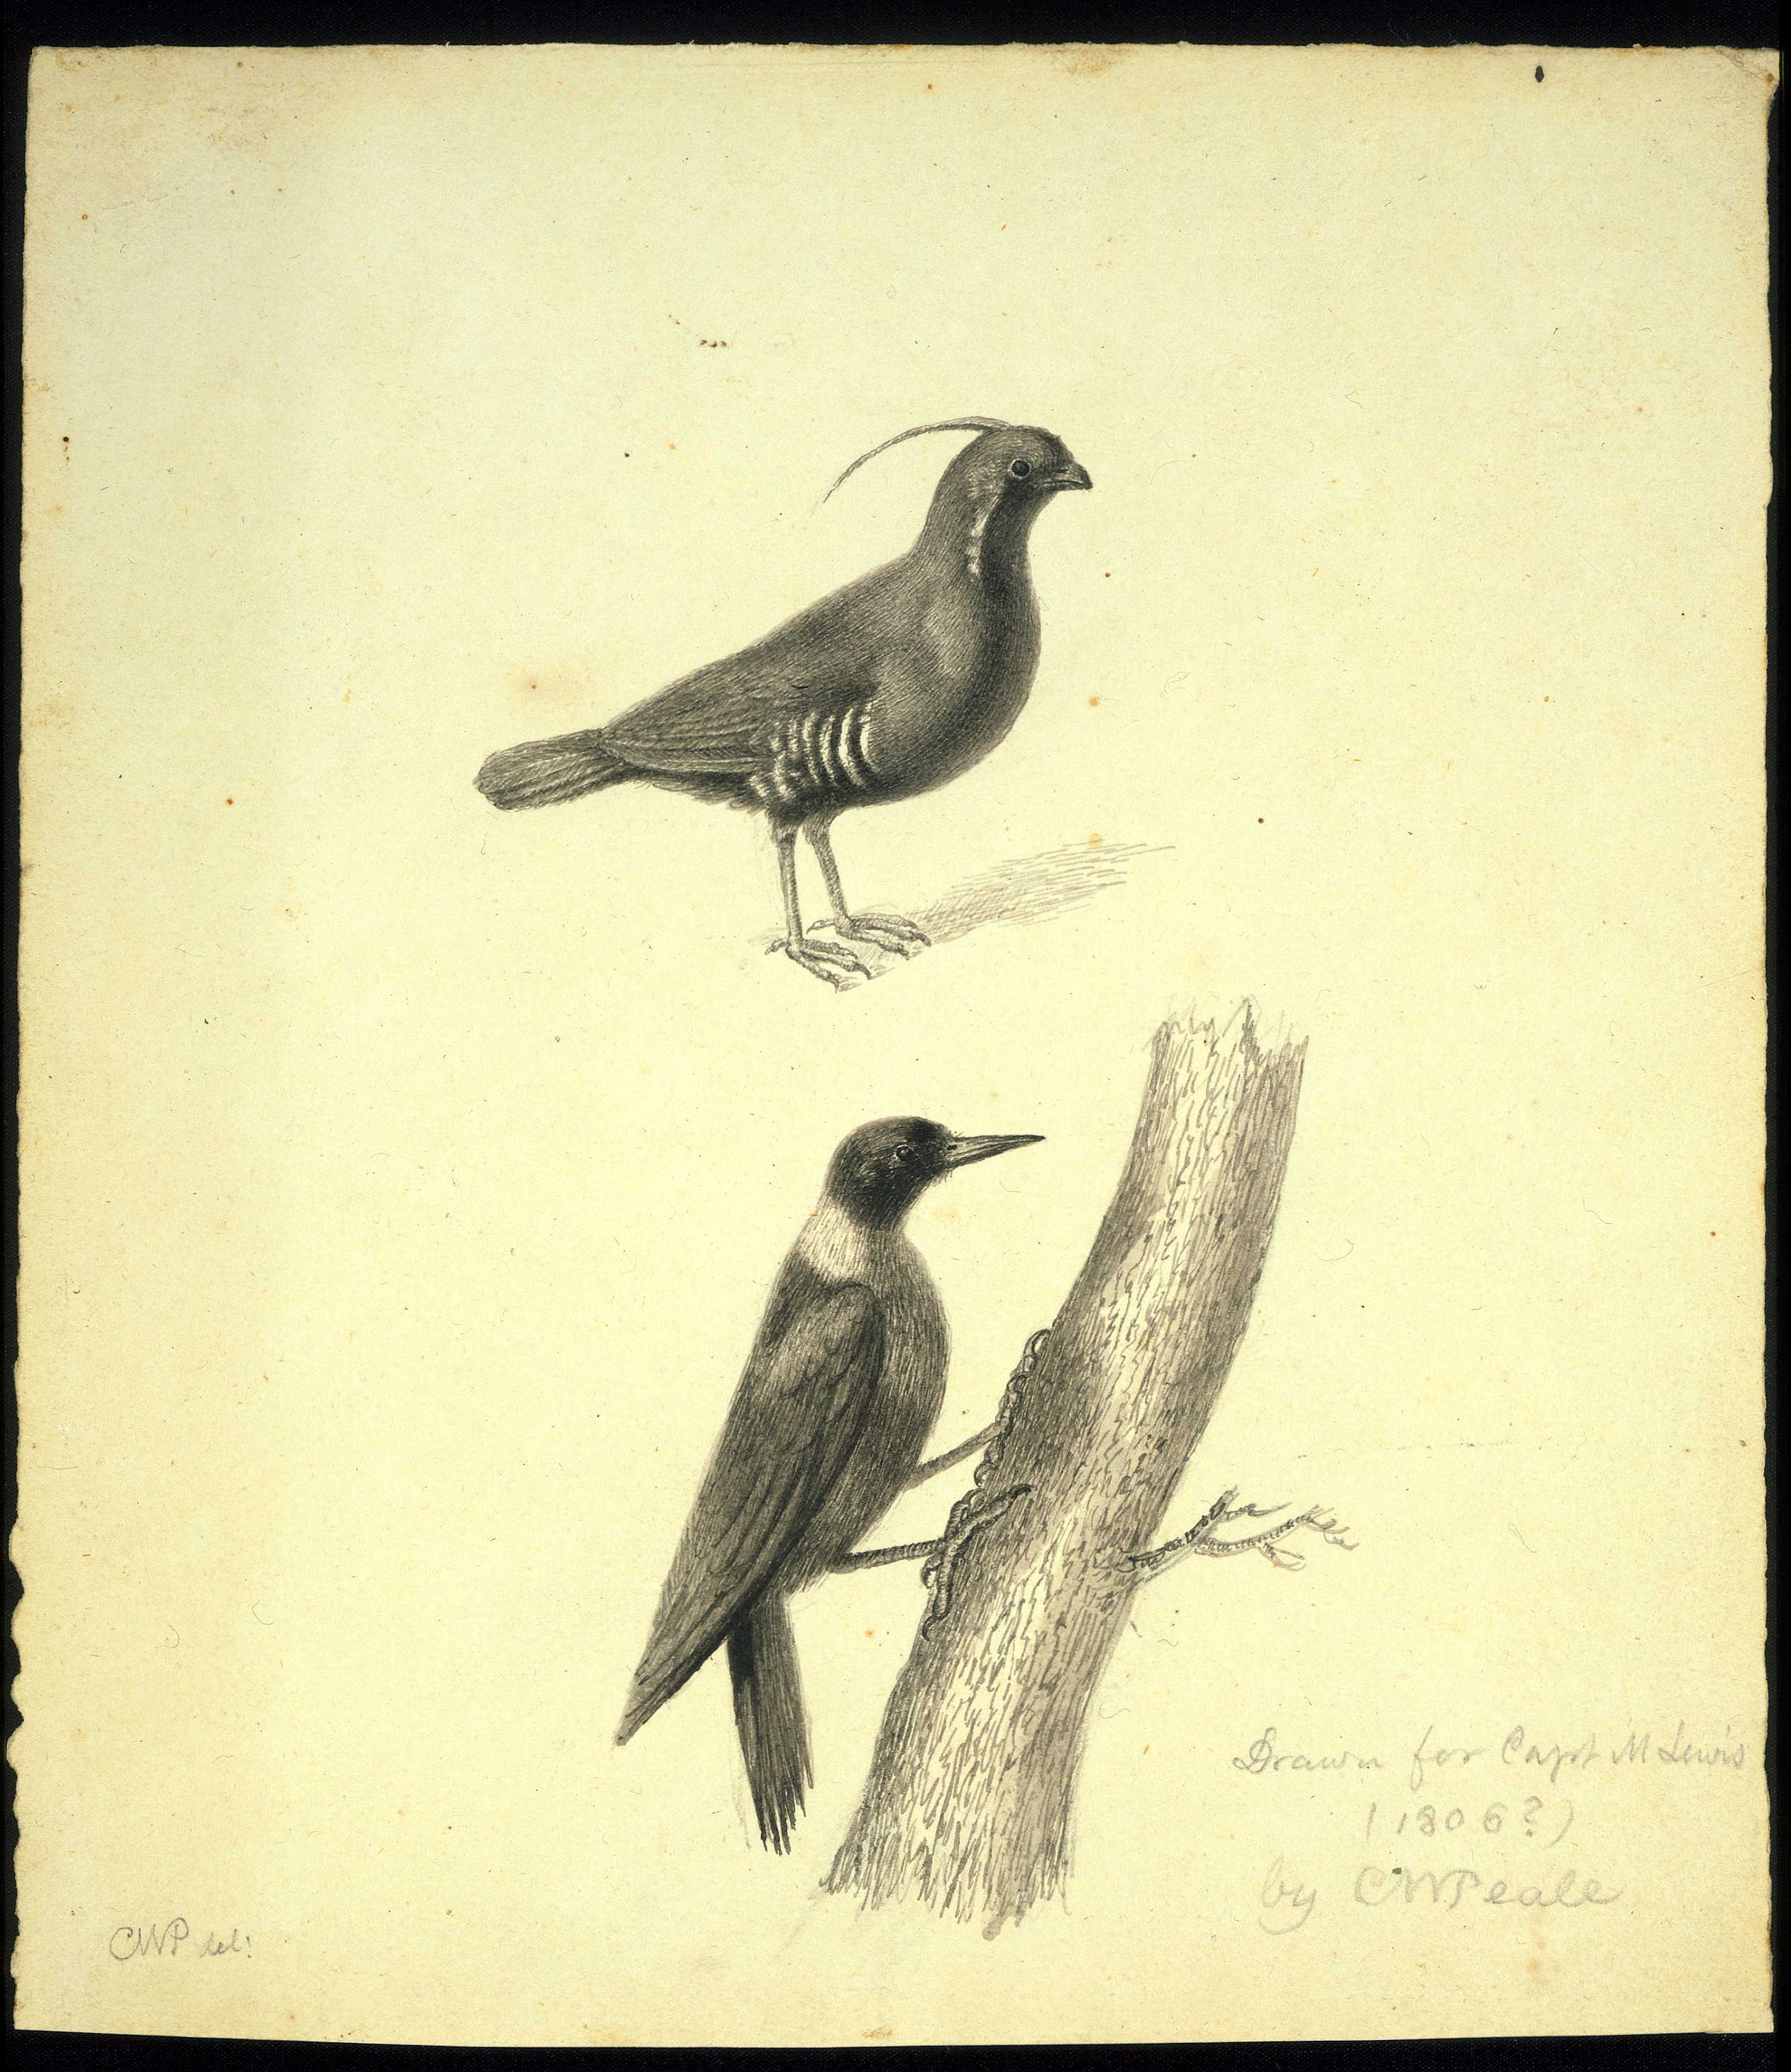 Print of two birds